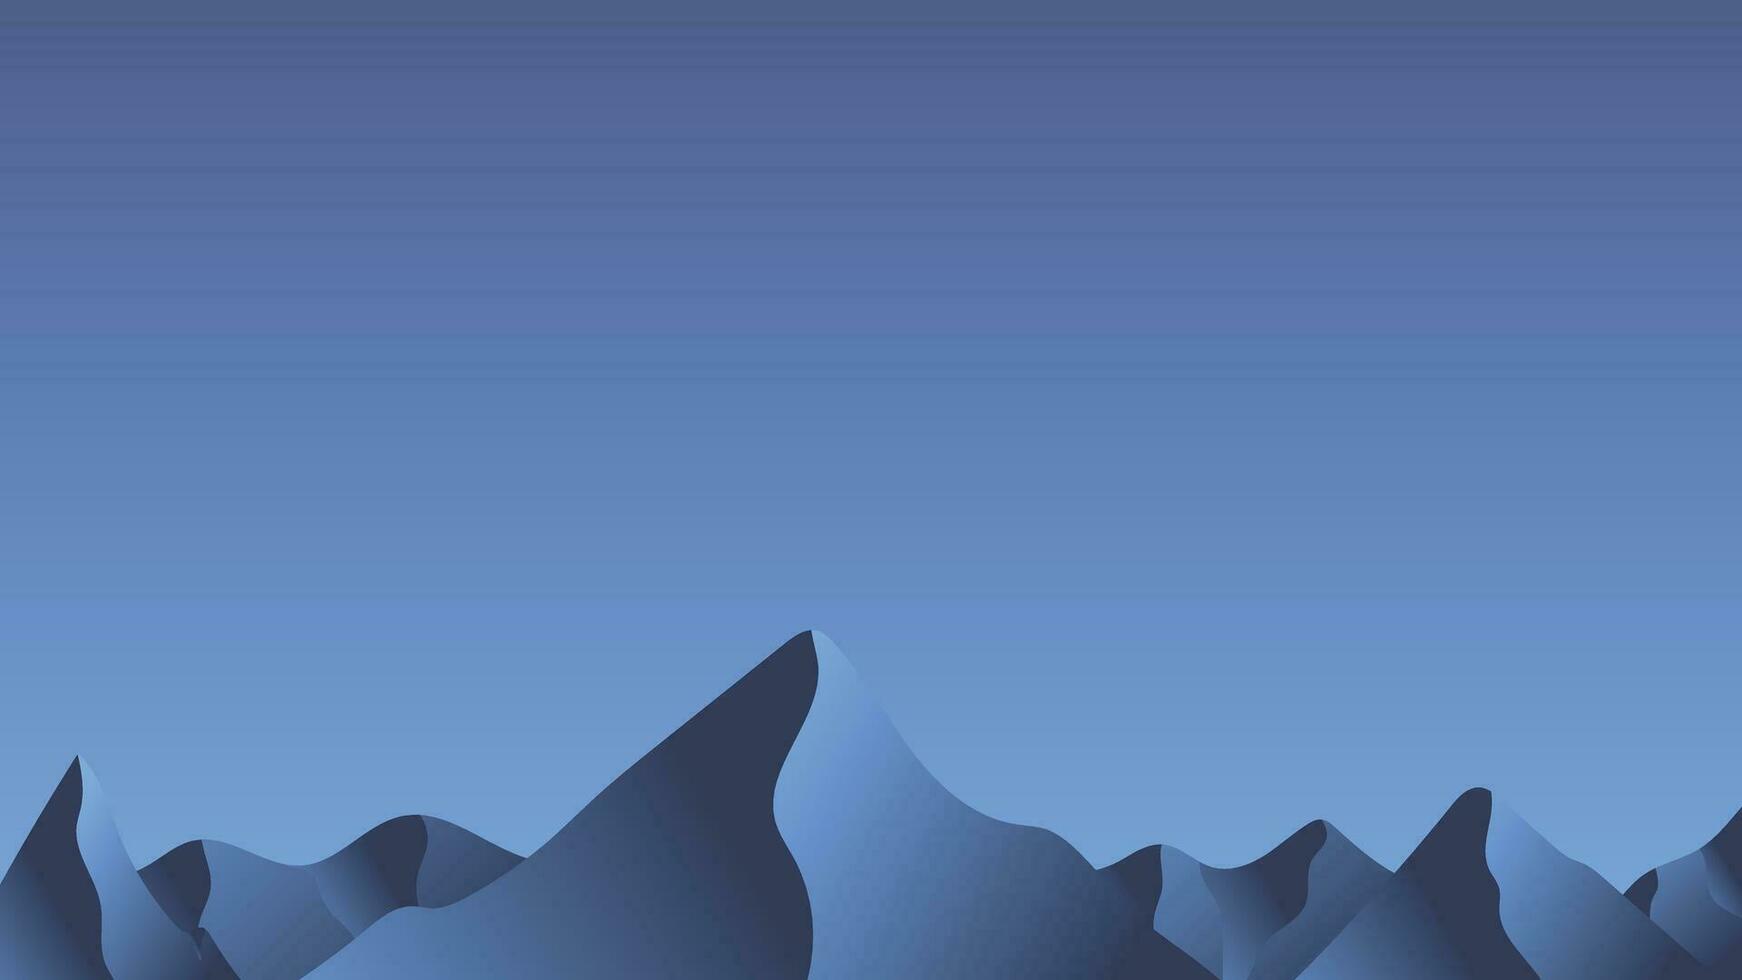 Mountain landscape at night in flat design vector